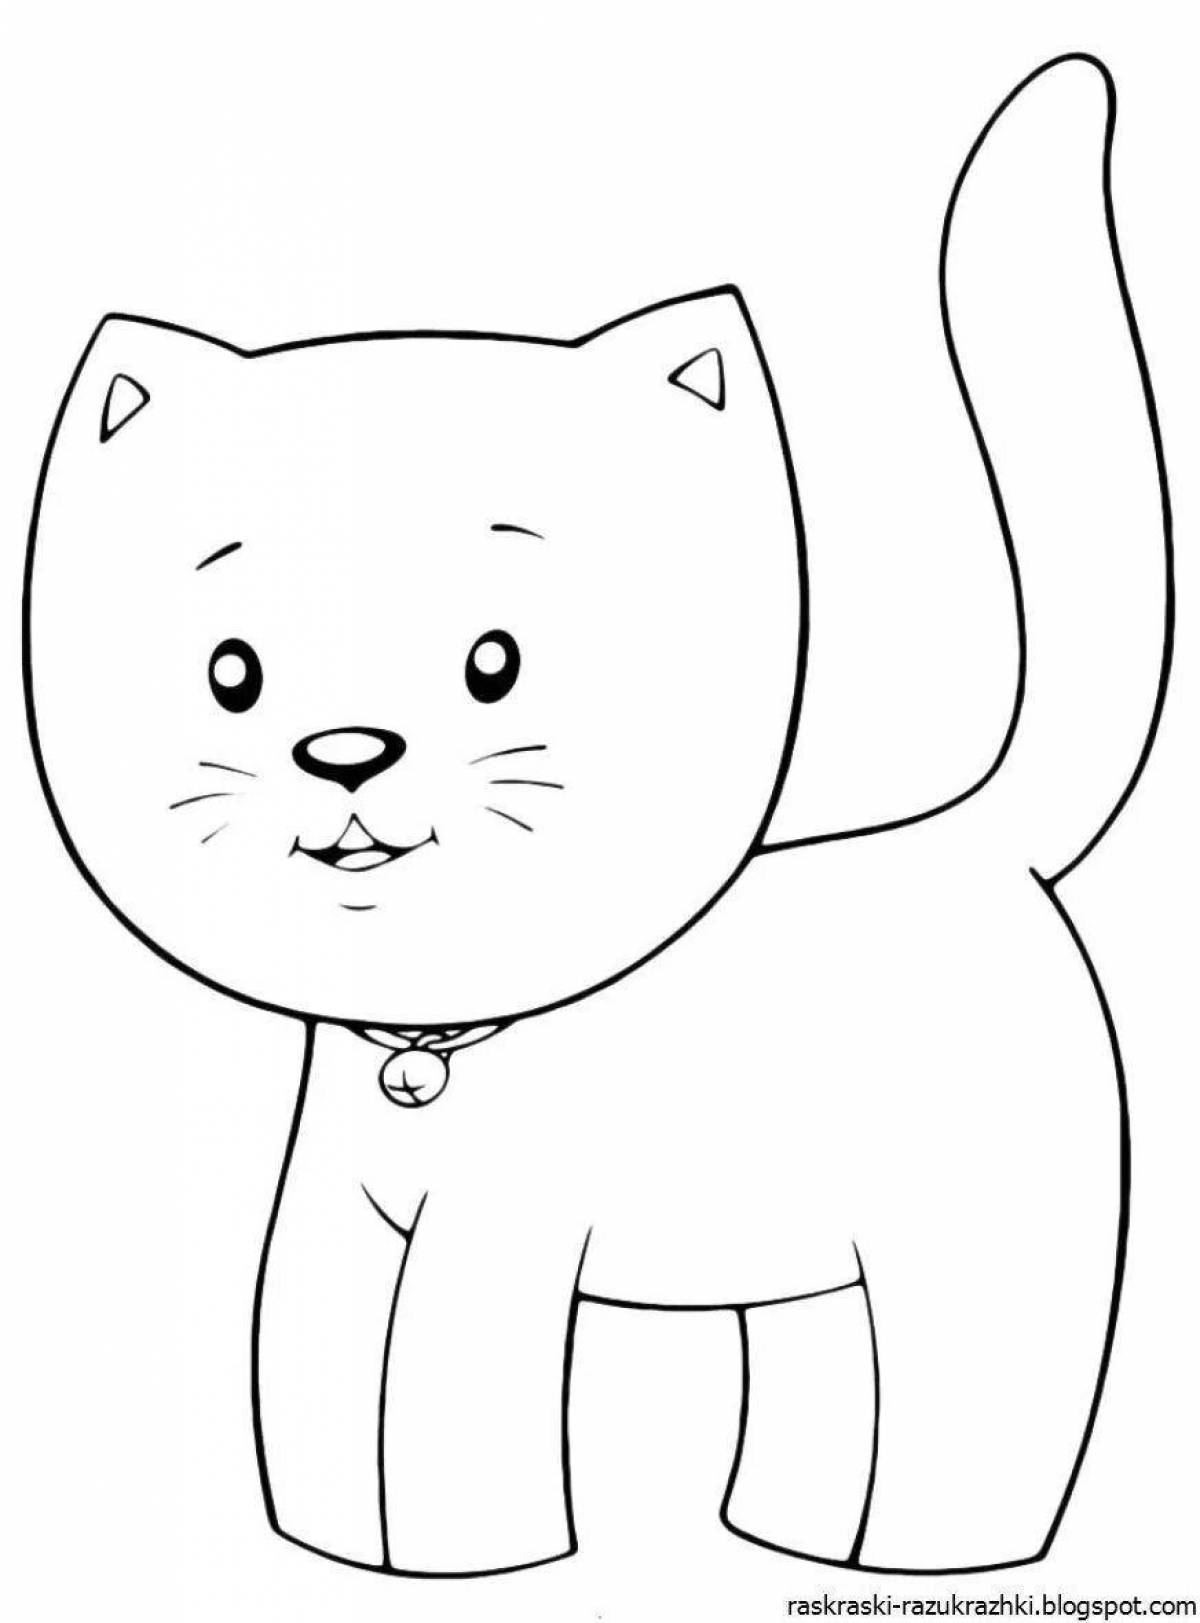 Colorful cat coloring page for kids